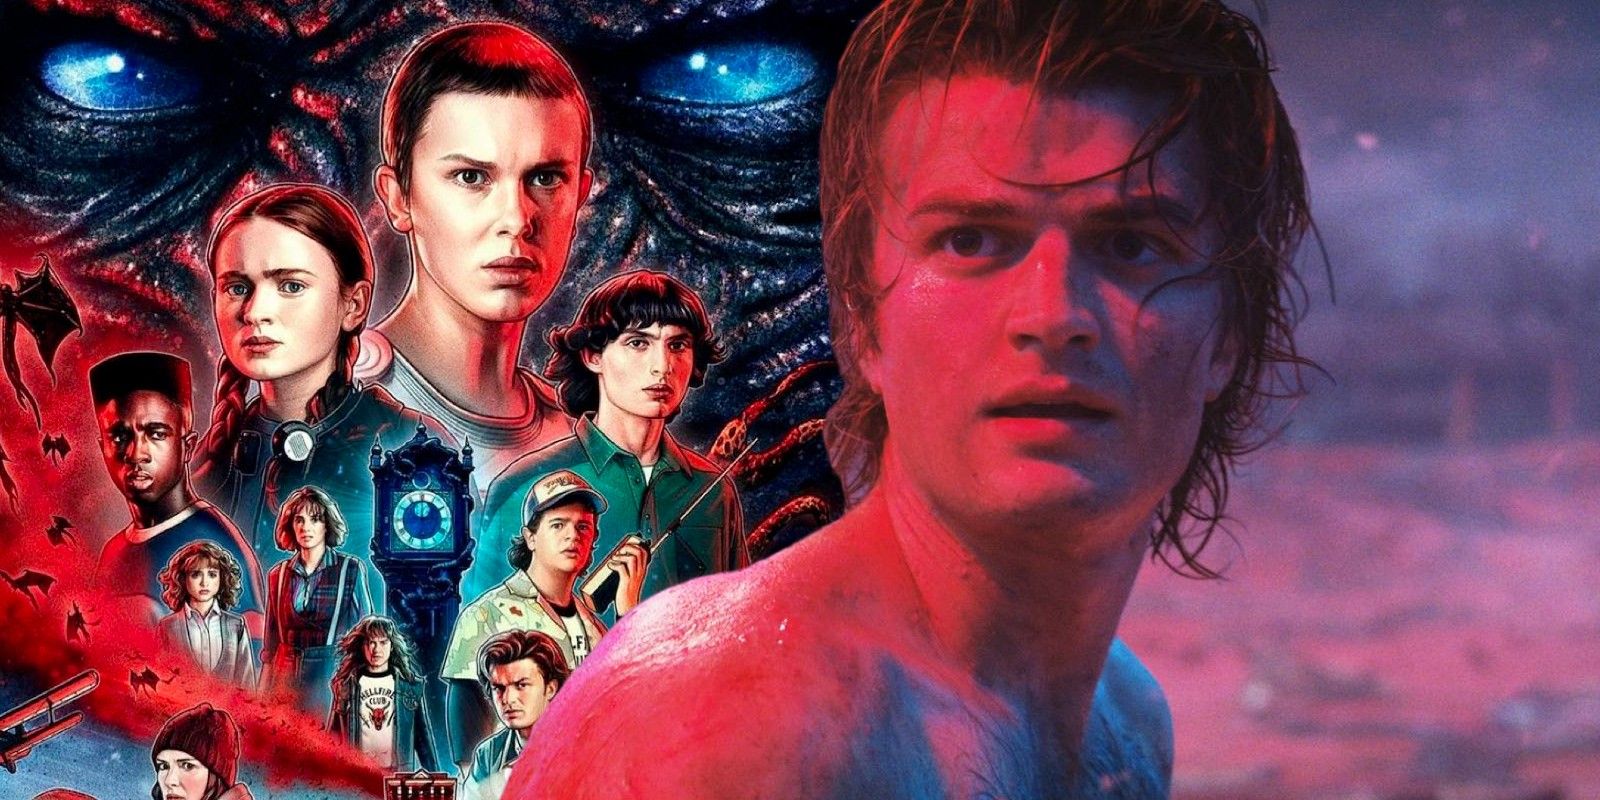 Stranger Things' 4 Volume 2: Does Jason Carver Meet His Death? Theories  Suggest so